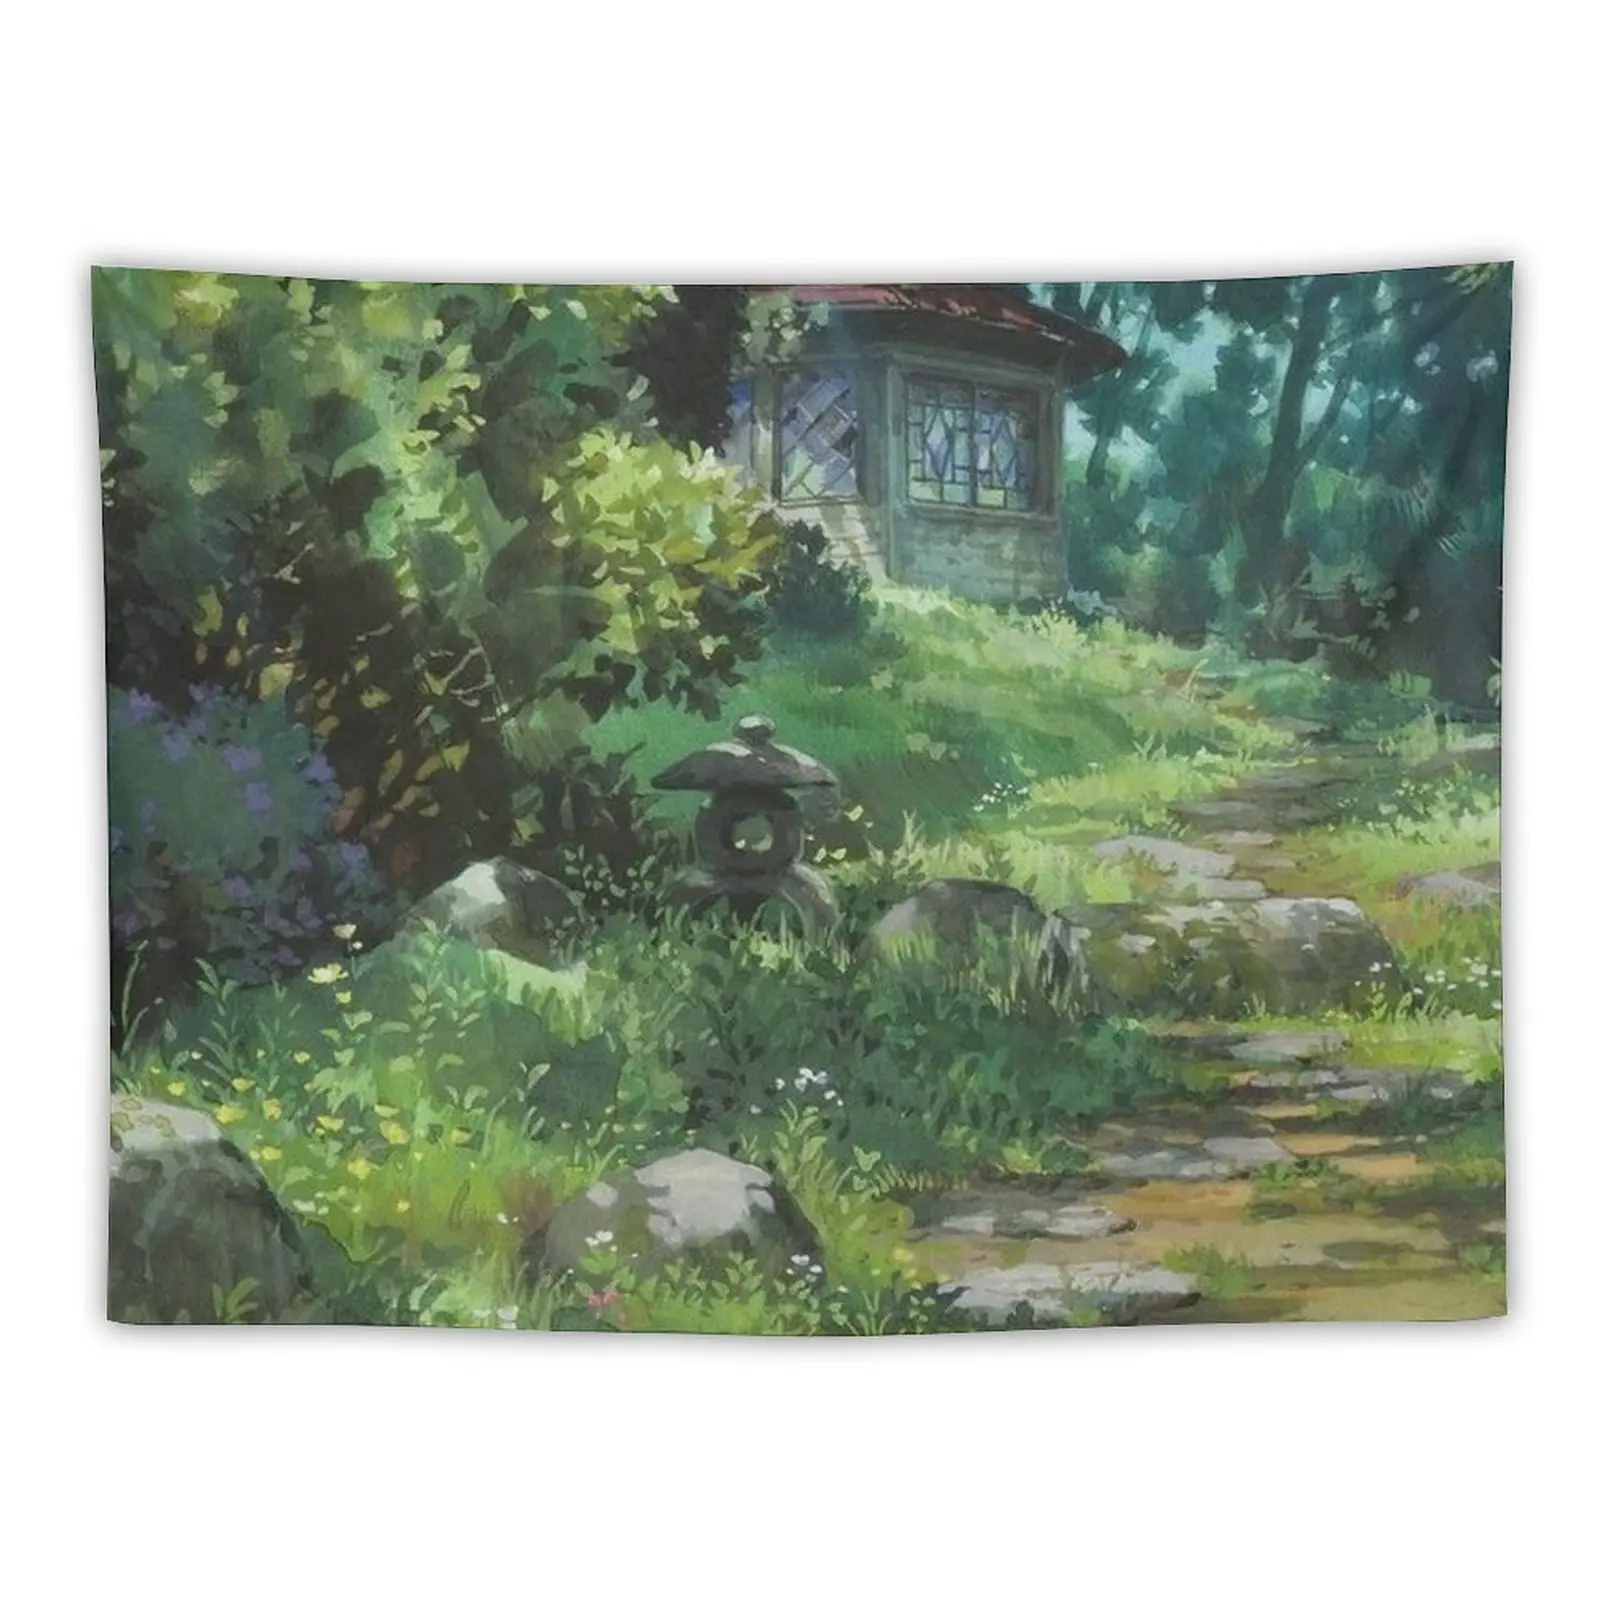 

Anime Magical Forest Scenery Tapestry Decoration Home House Decorations Home Decor Aesthetic Tapestry